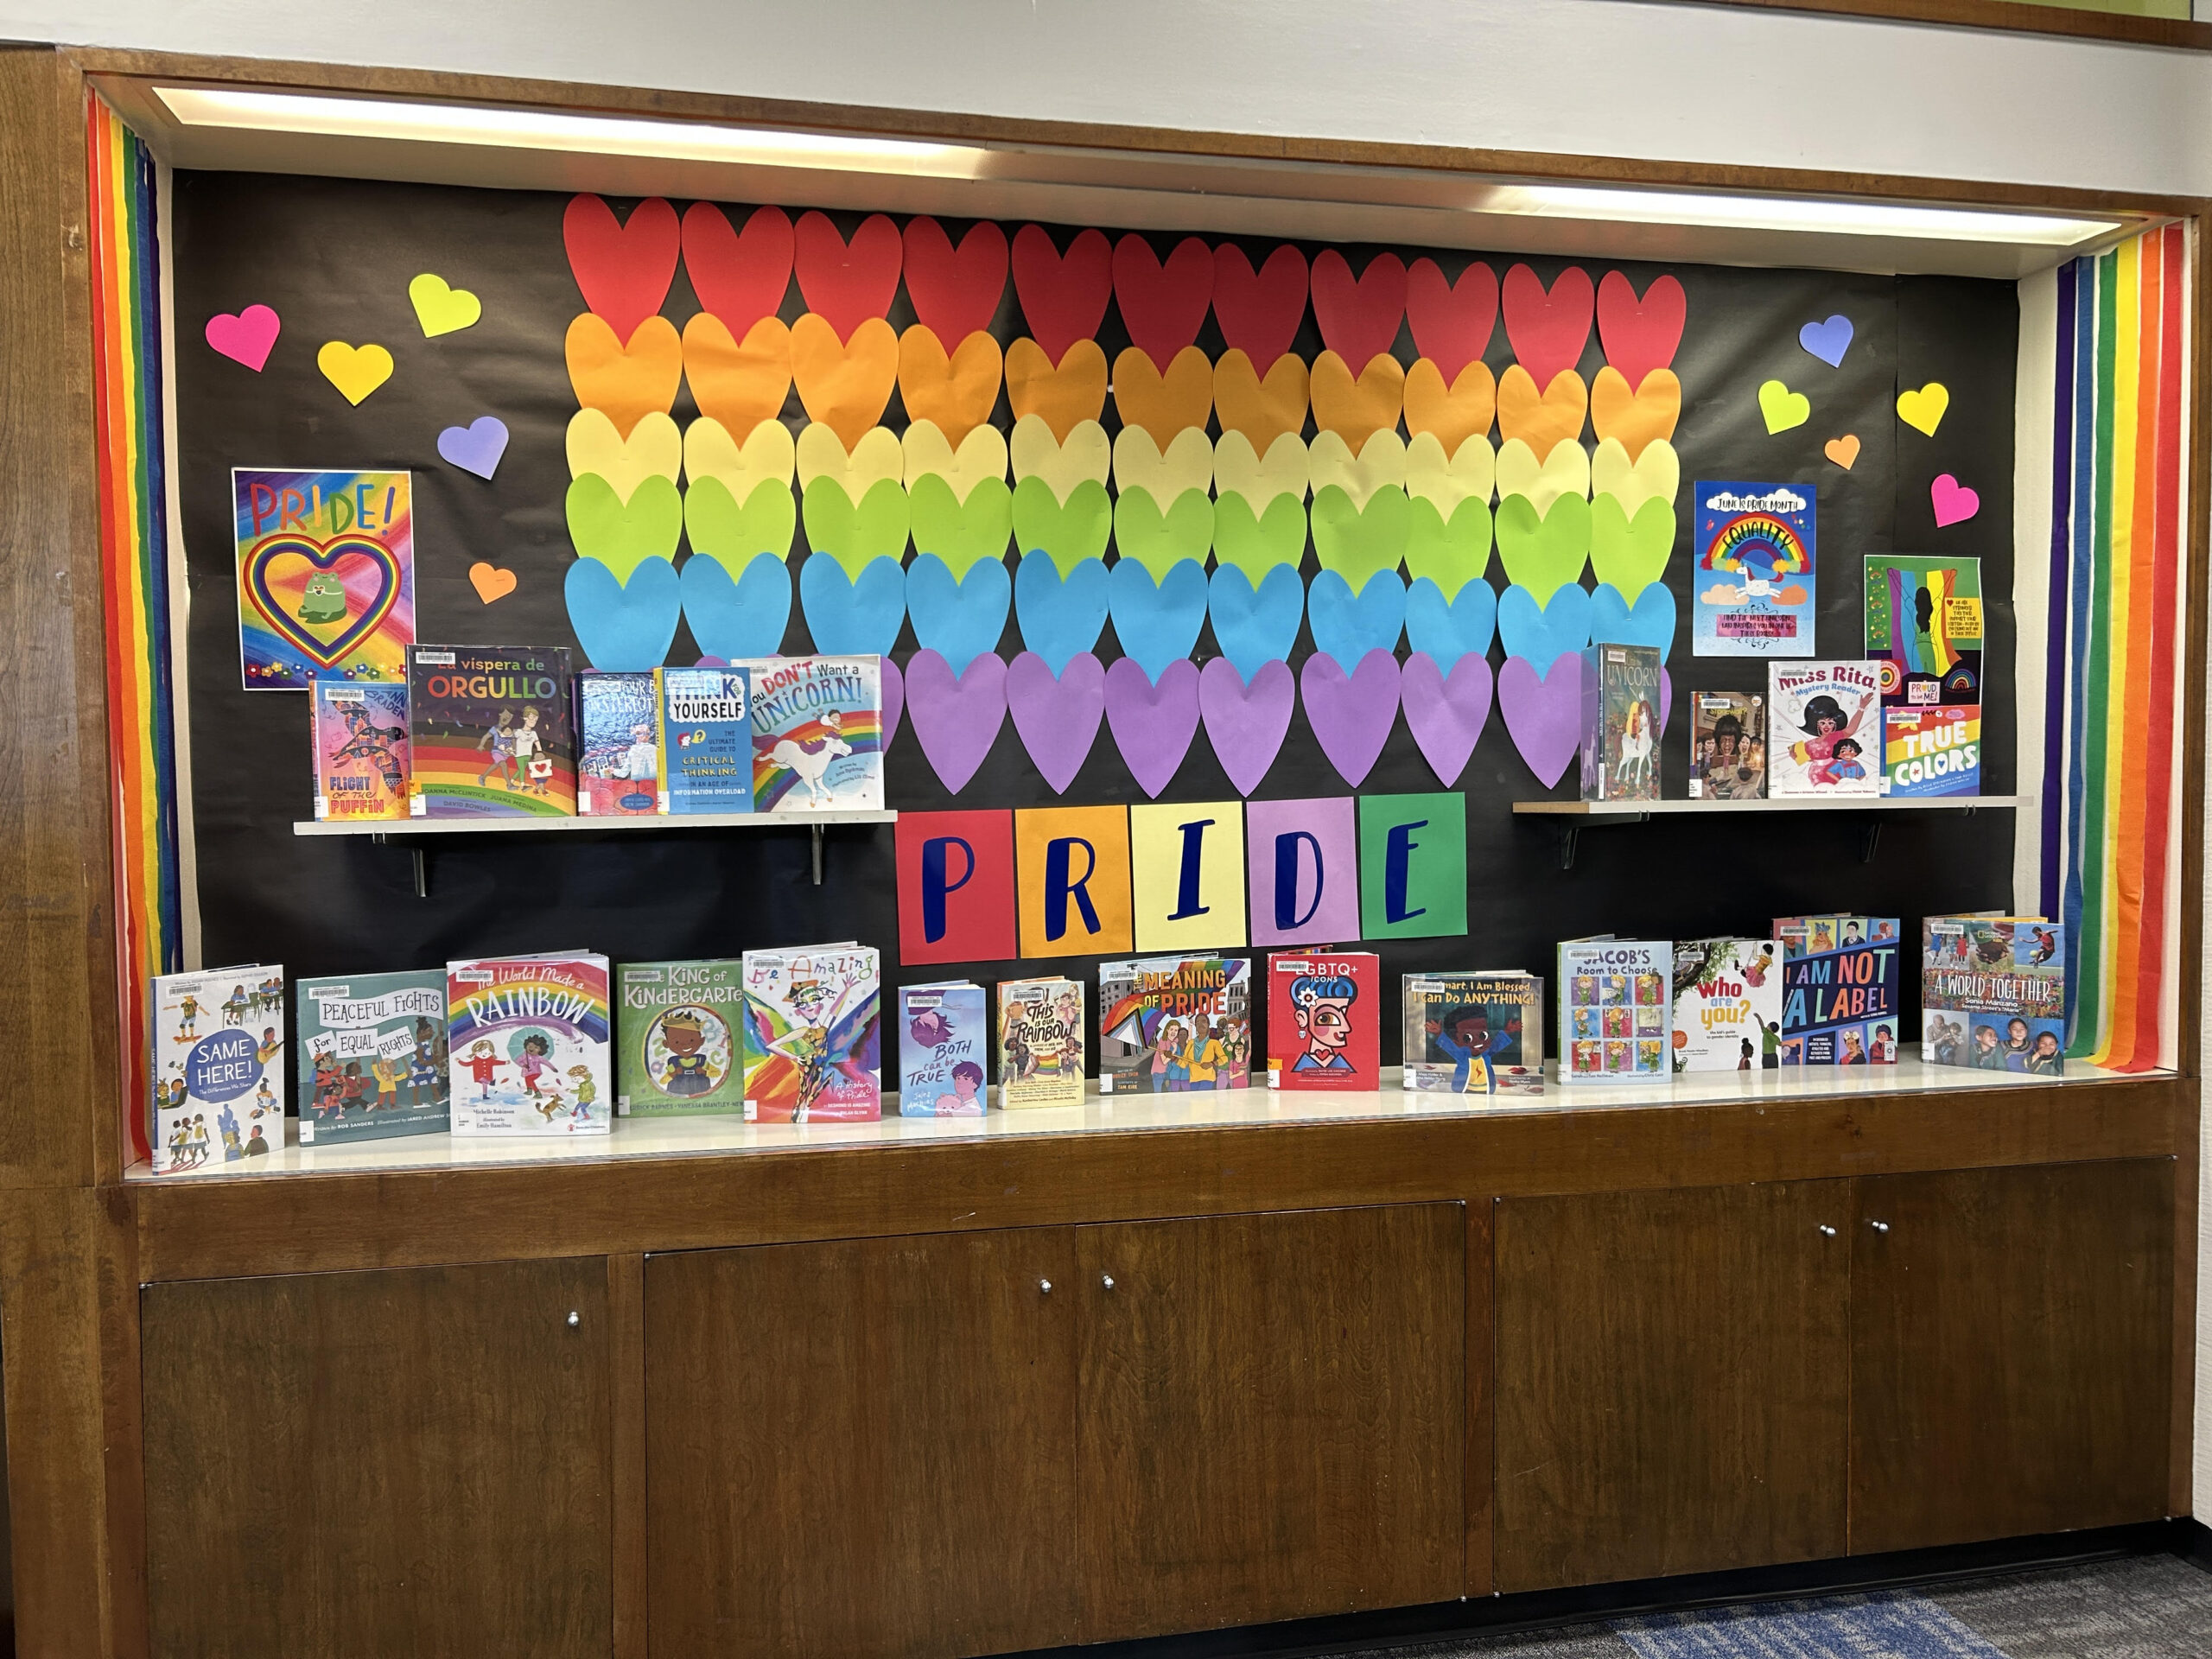 A library display decorated with rainbow paper hearts and pride-themed books.